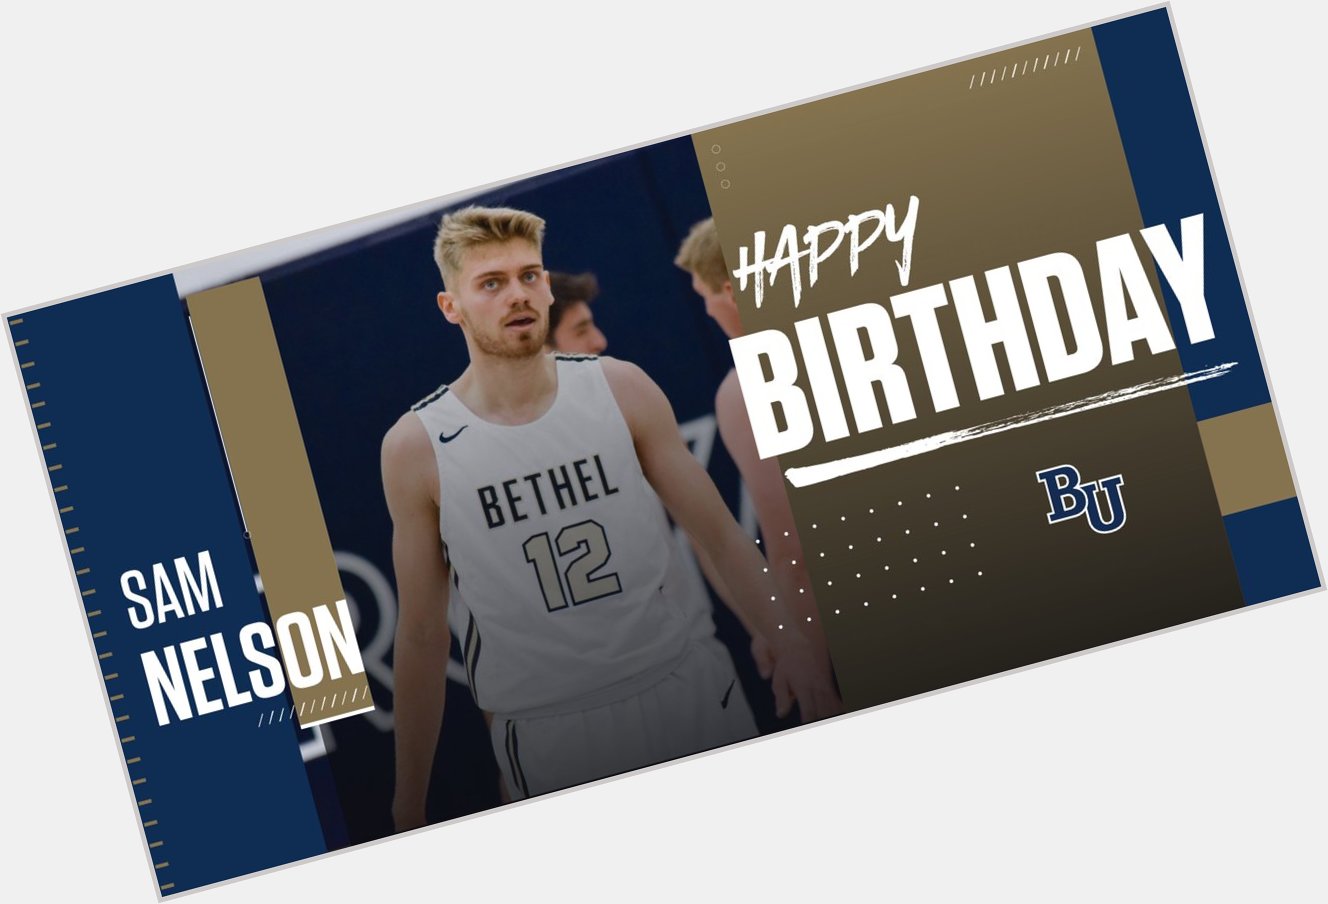 Join us in wishing our very own Sam Nelson a Happy Birthday   